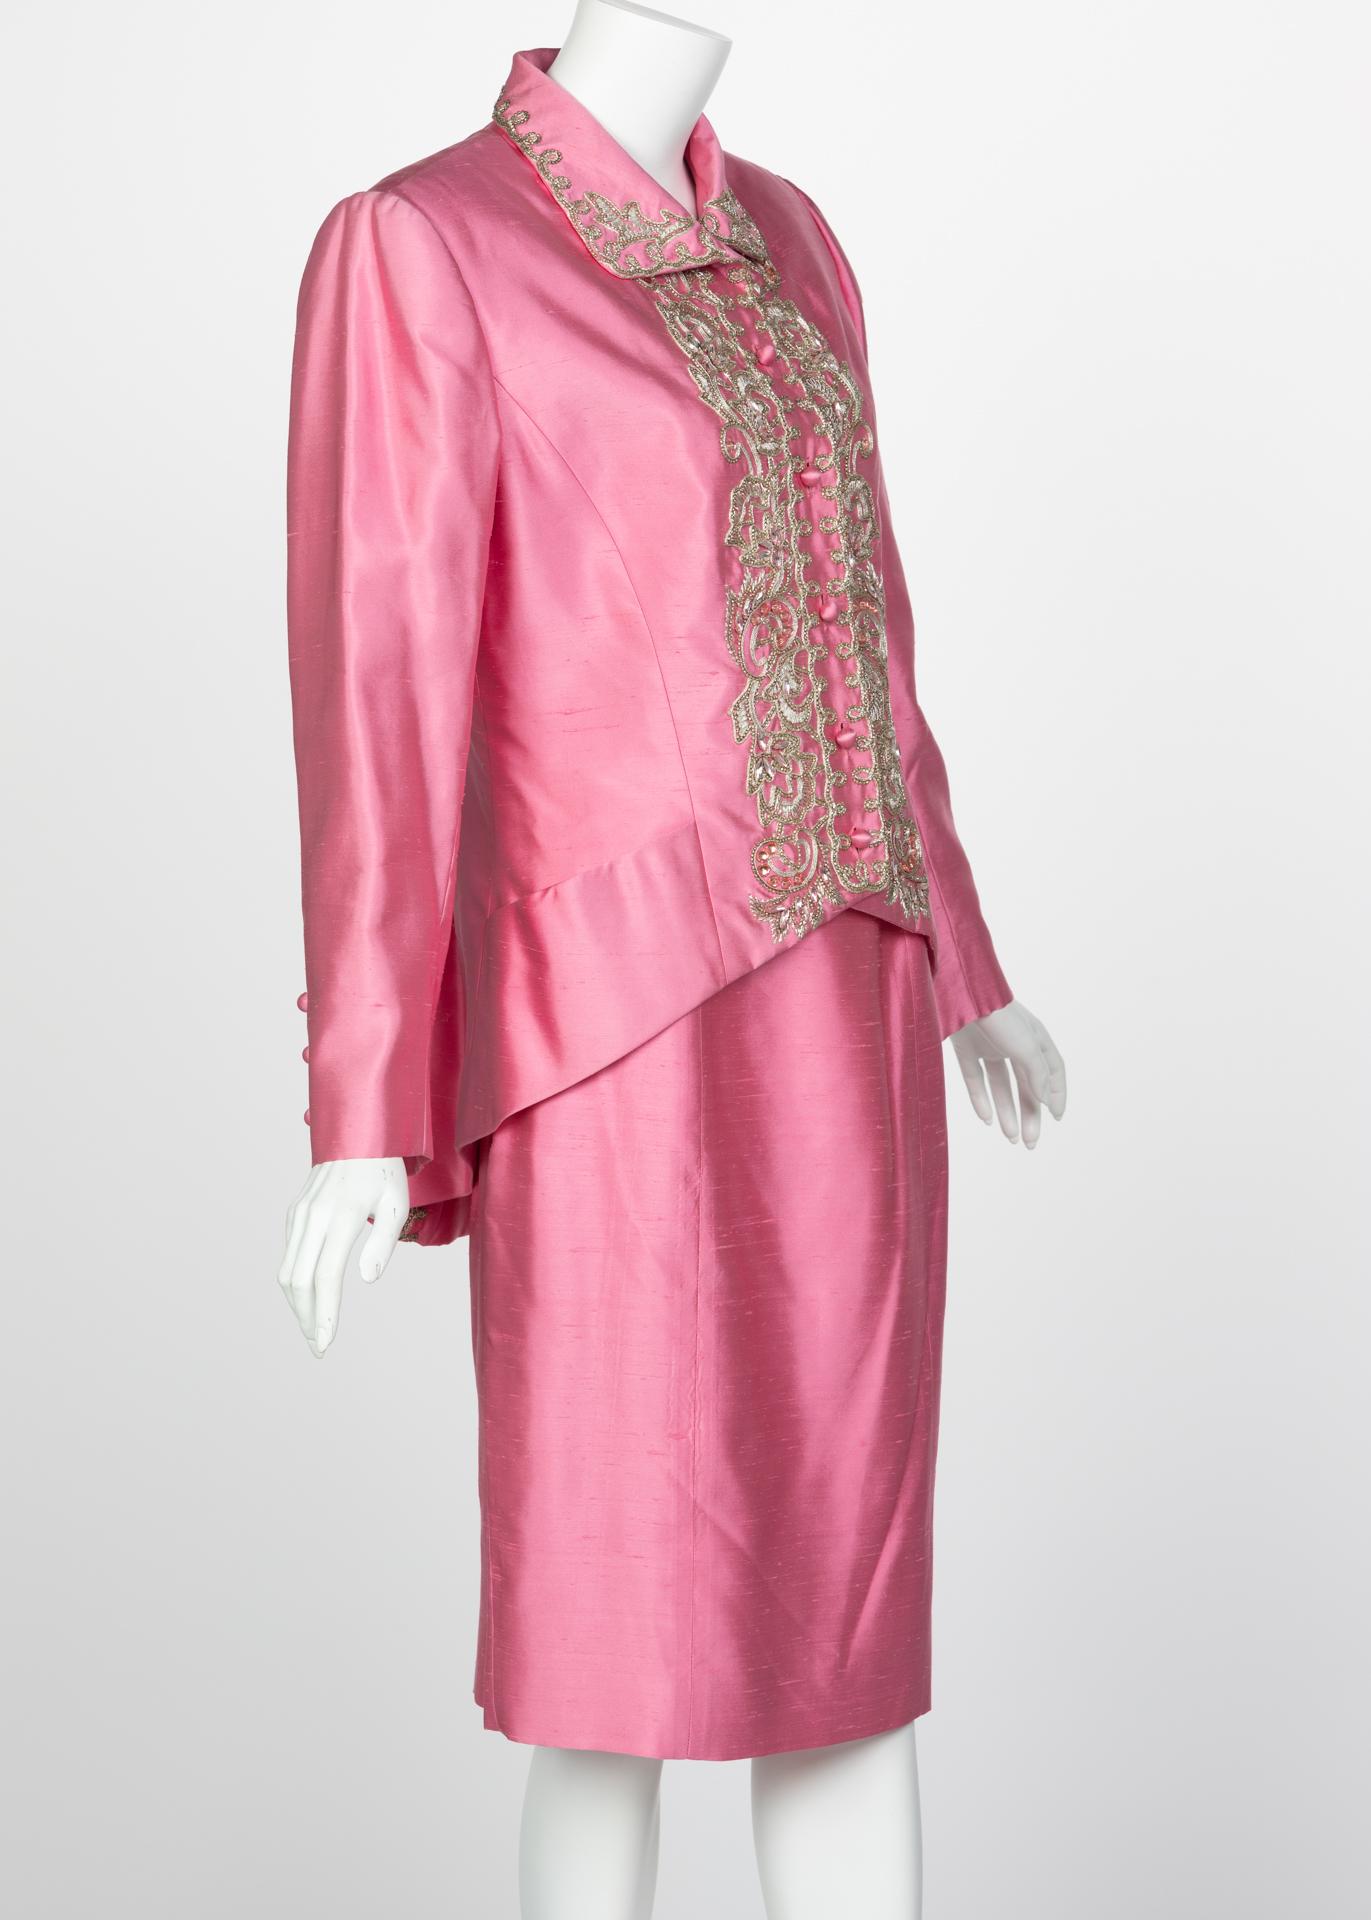 Vintage Chloé Pink Silk Shantung Embroidered Beaded Skirt Suit In Excellent Condition For Sale In Boca Raton, FL